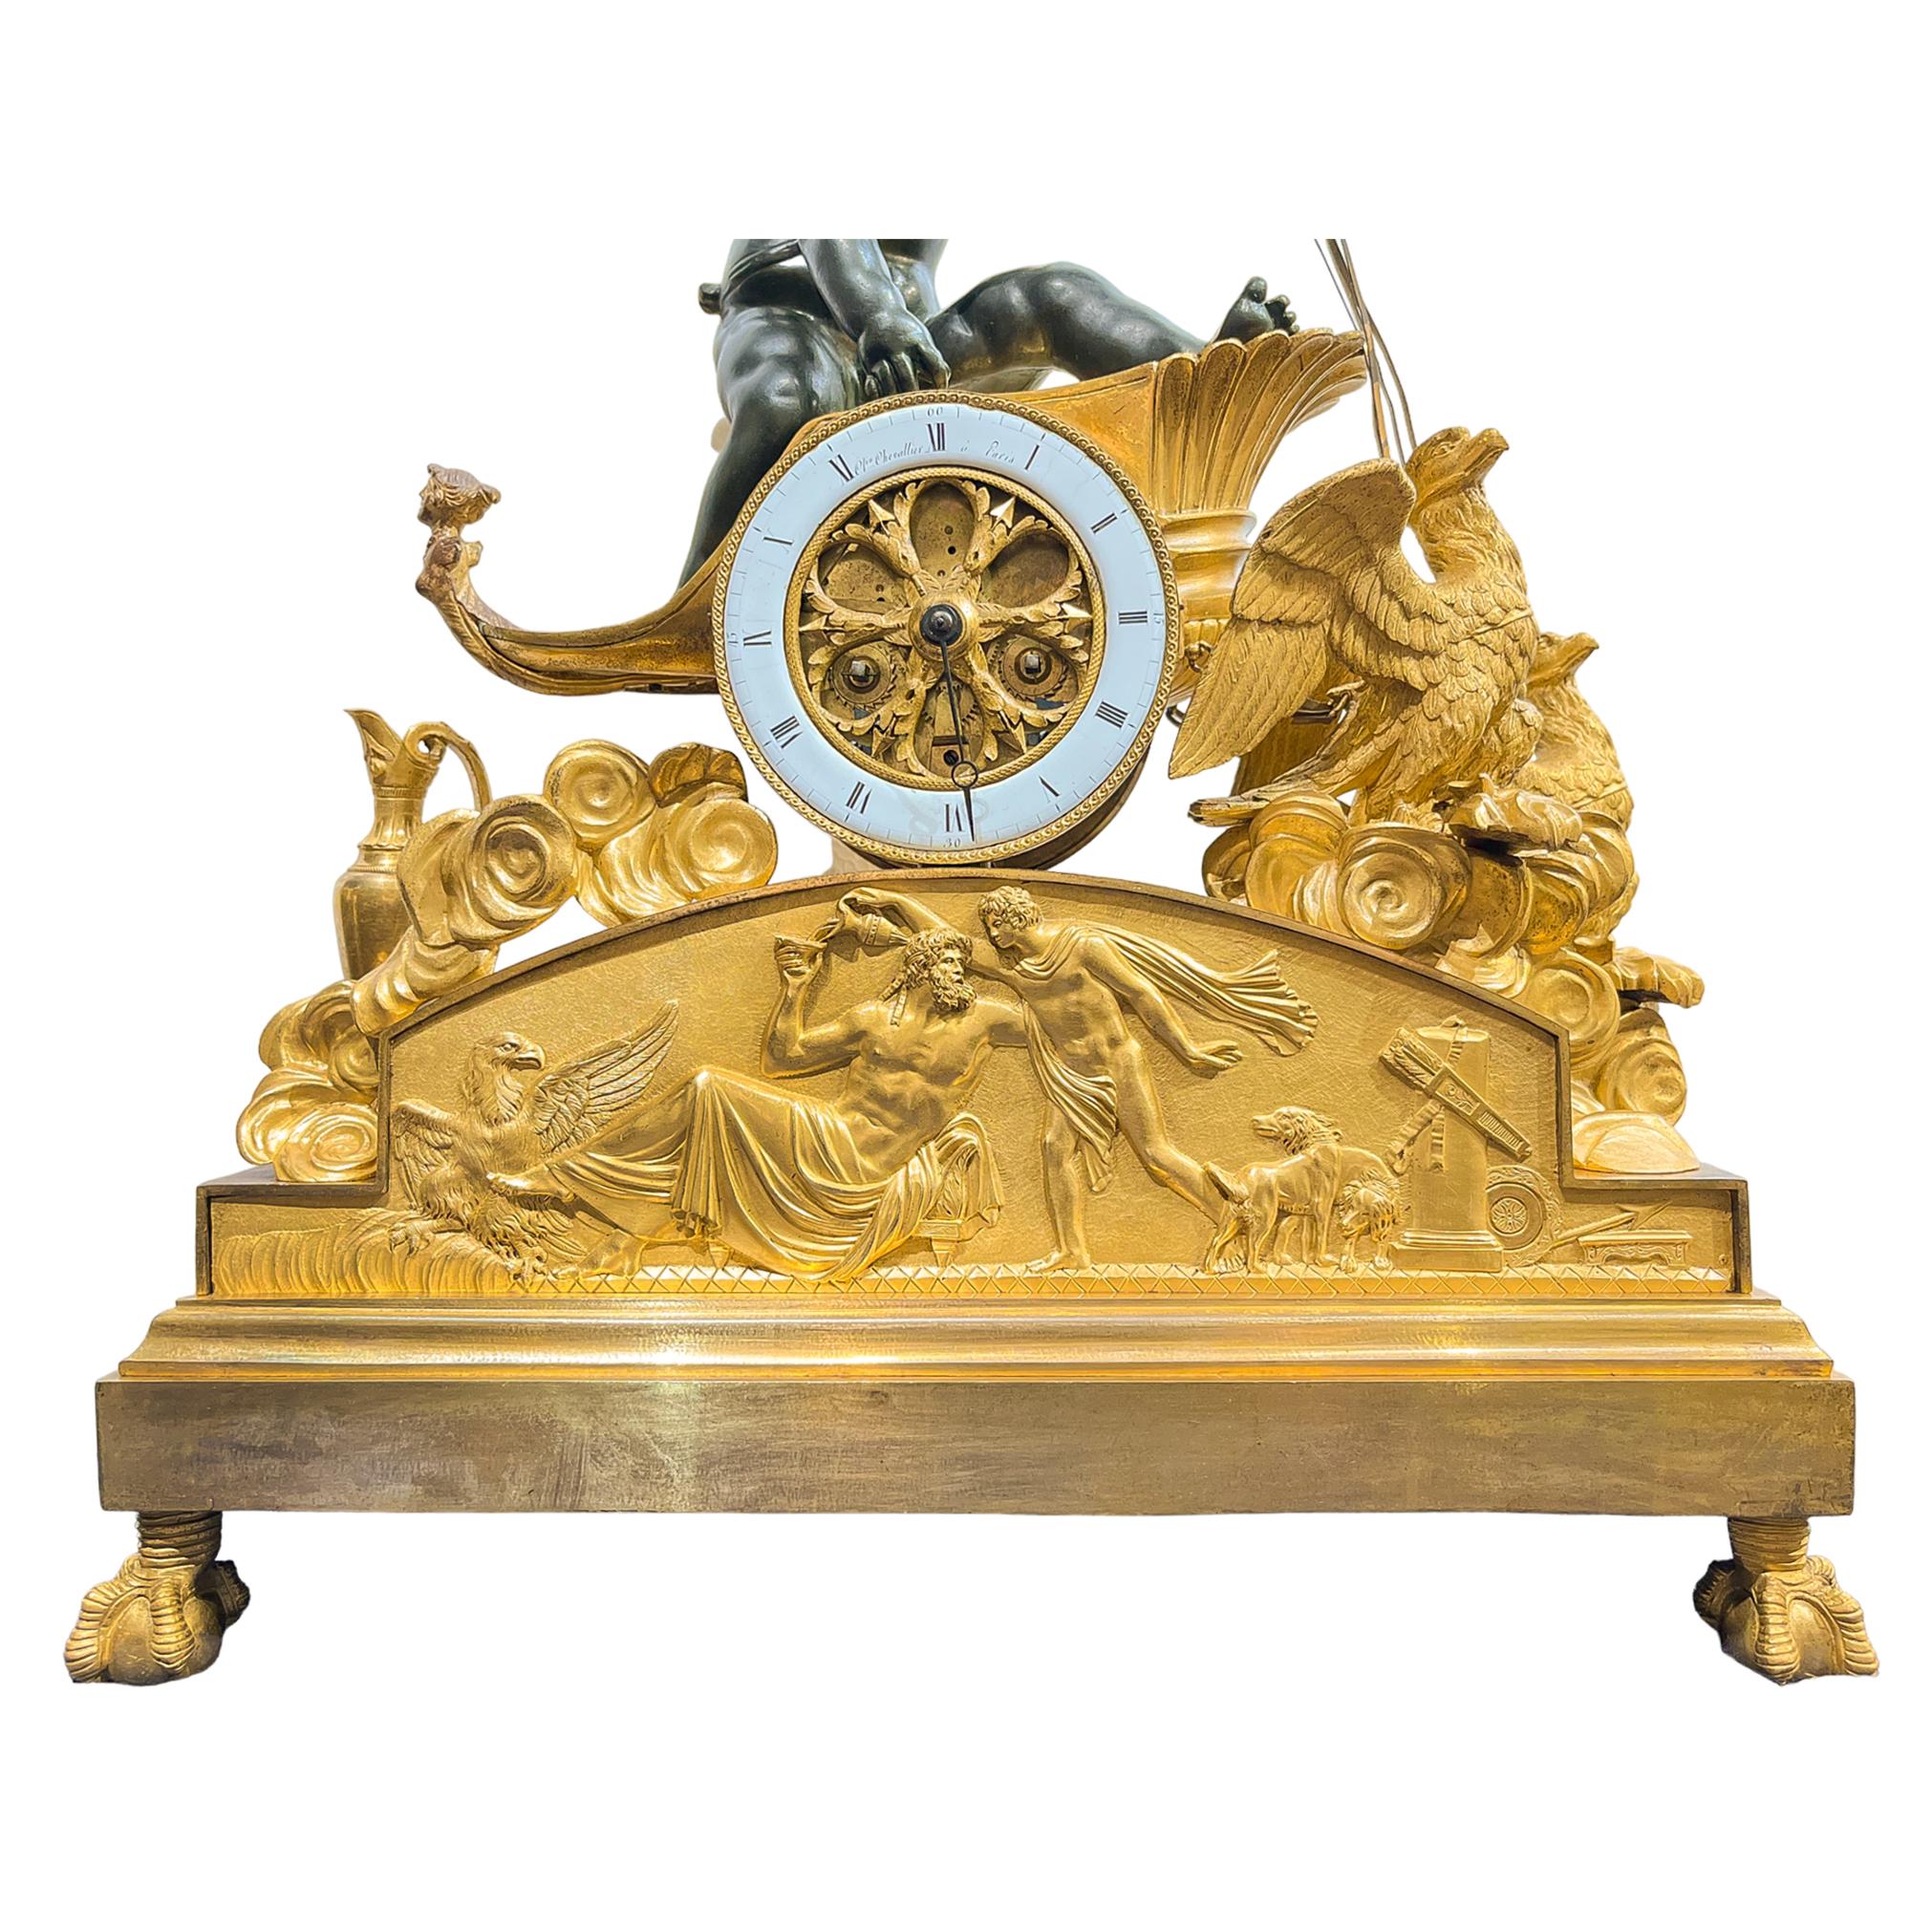 Fascinating gilt bronze Empire chariot clock surmounted by a bronze putto in Zeus’ chariot, drawn by two eagles through the clouds. On the left side we see a classical ewer with snake shaped handle. The scene rests on a base with a bas-relief